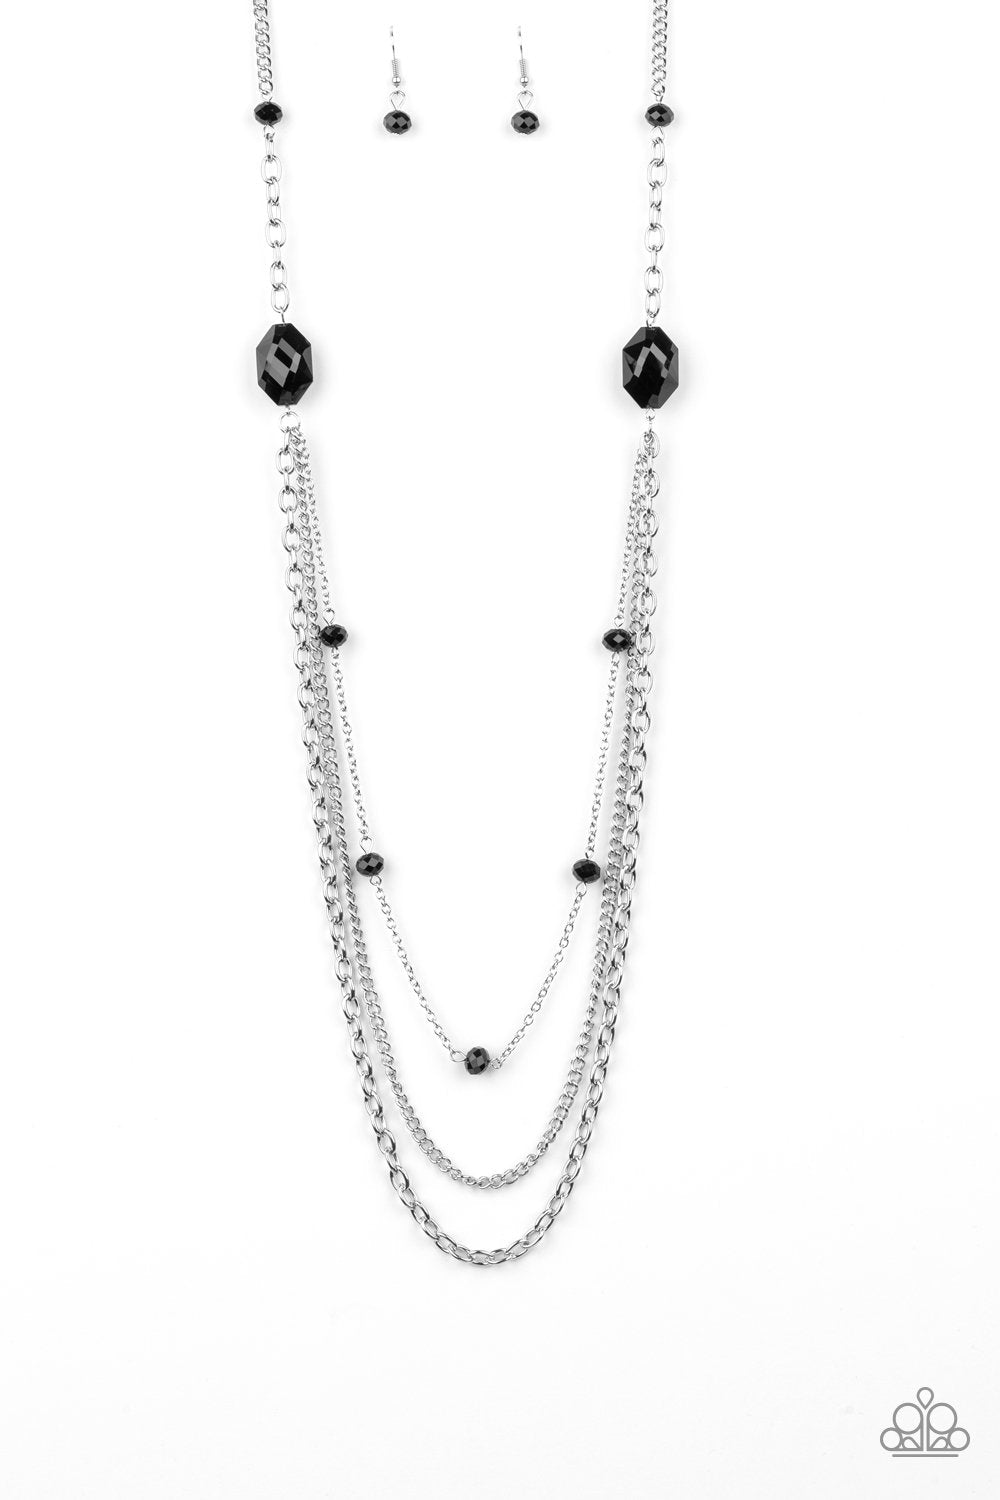 Dare To Dazzle Black Necklace - Paparazzi Accessories - lightbox -CarasShop.com - $5 Jewelry by Cara Jewels